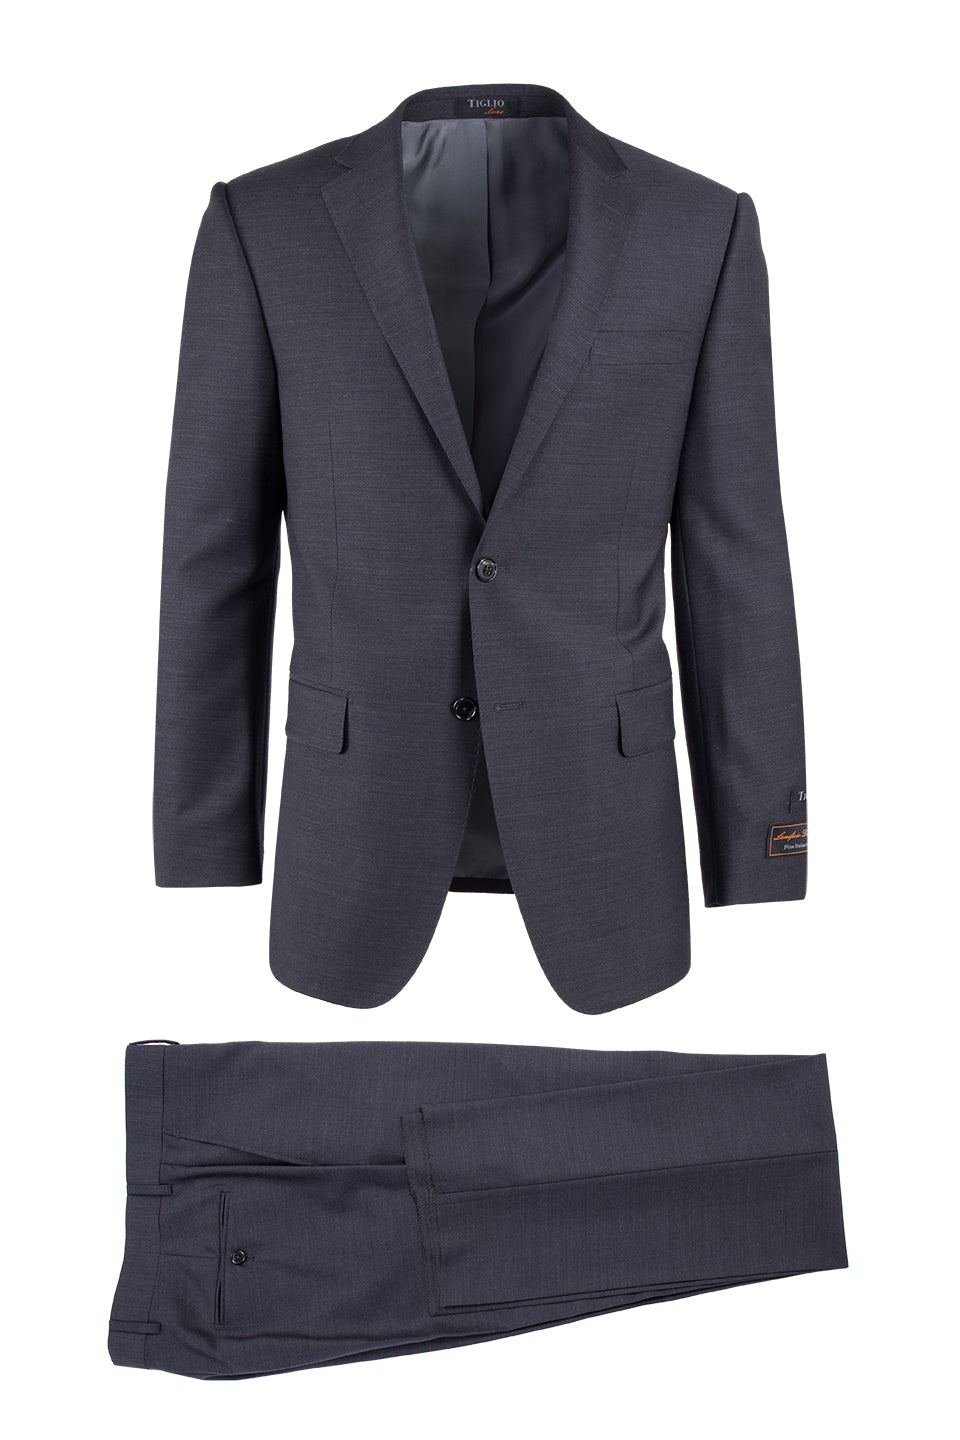 Modern Fit, Suit TIG10 by Tiglio Luxe Pure | Charcoal Novello Gray, Wool Tiglio